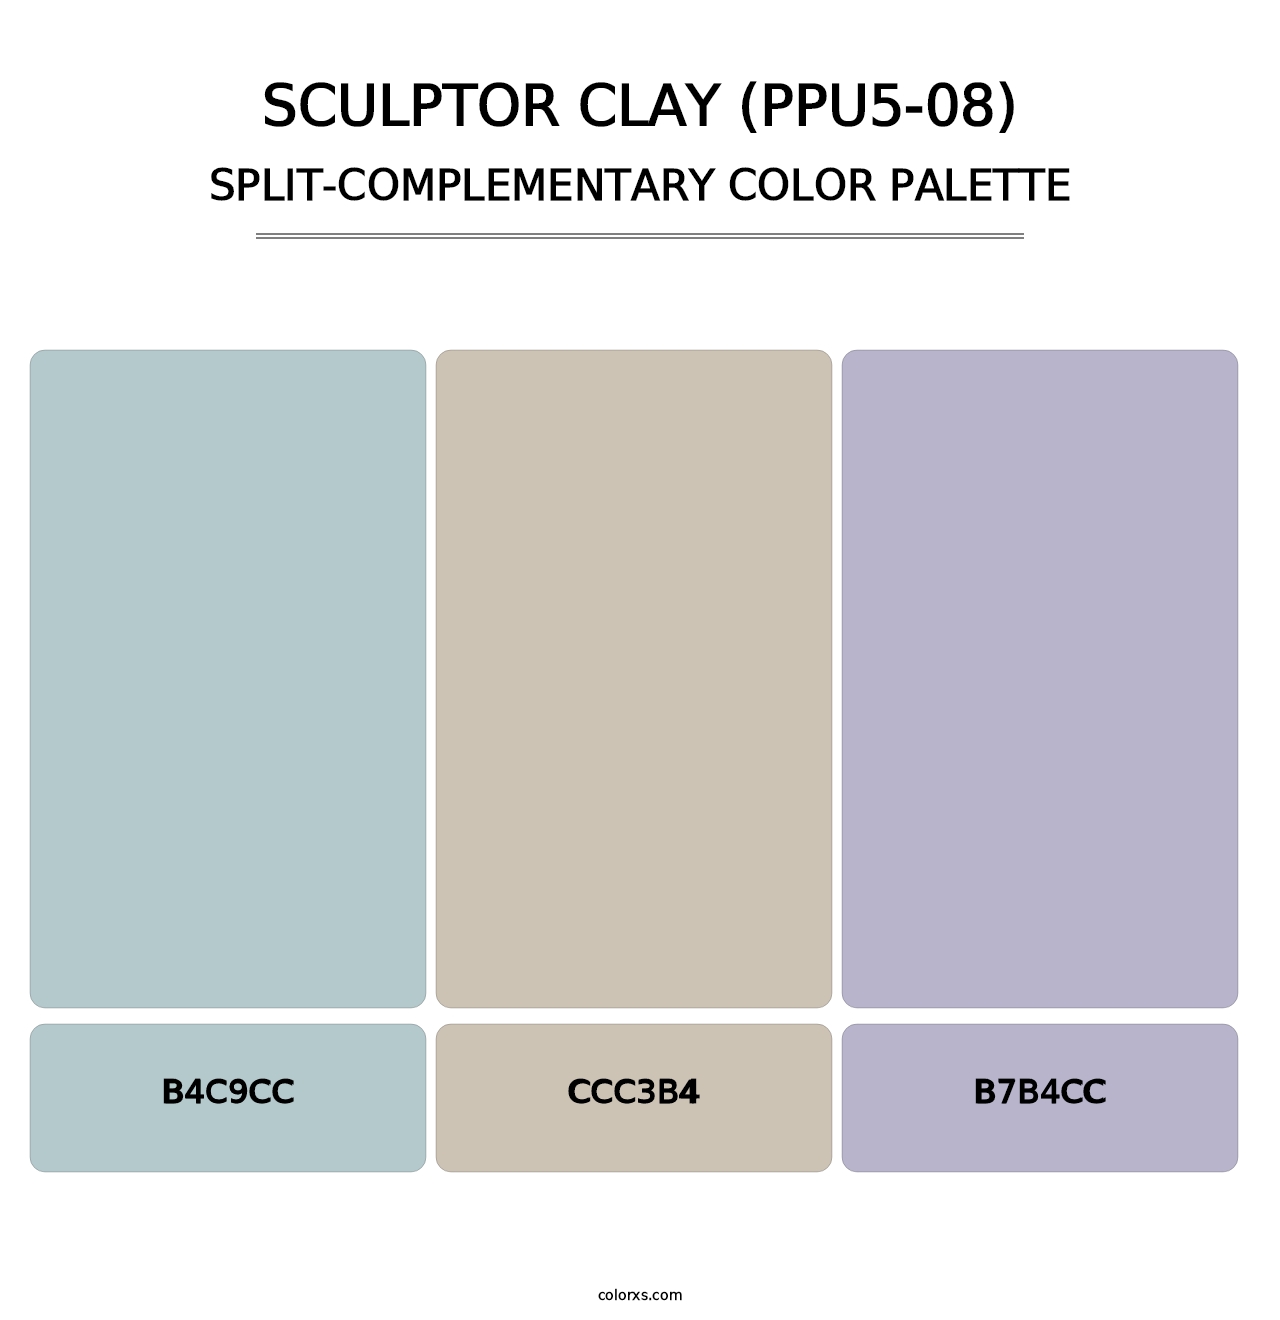 Sculptor Clay (PPU5-08) - Split-Complementary Color Palette